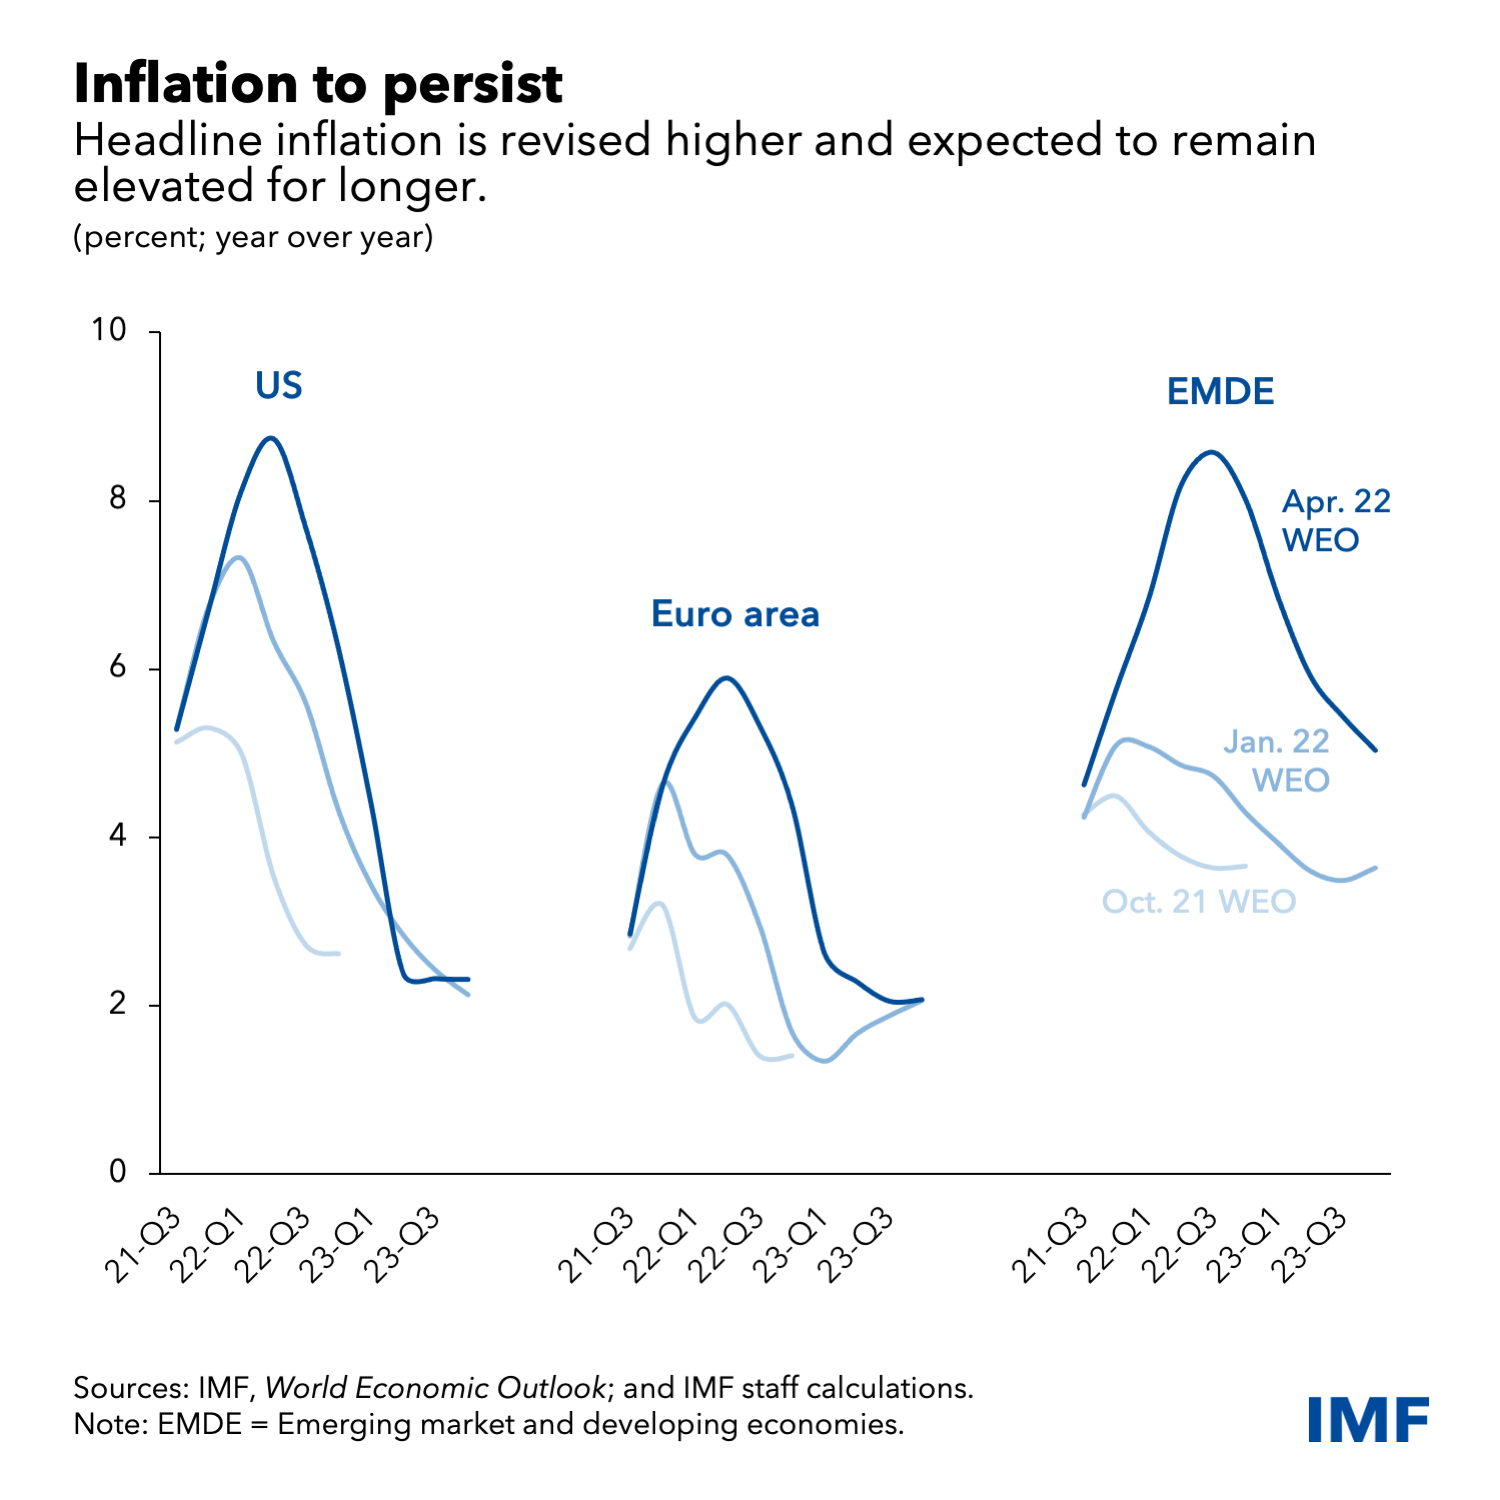 Projected headline inflation, 2021-2023, showing inflation forecasts increasing in January 2022 and April 2022 from lower forecast rates in October 2021. Graphic: IMF